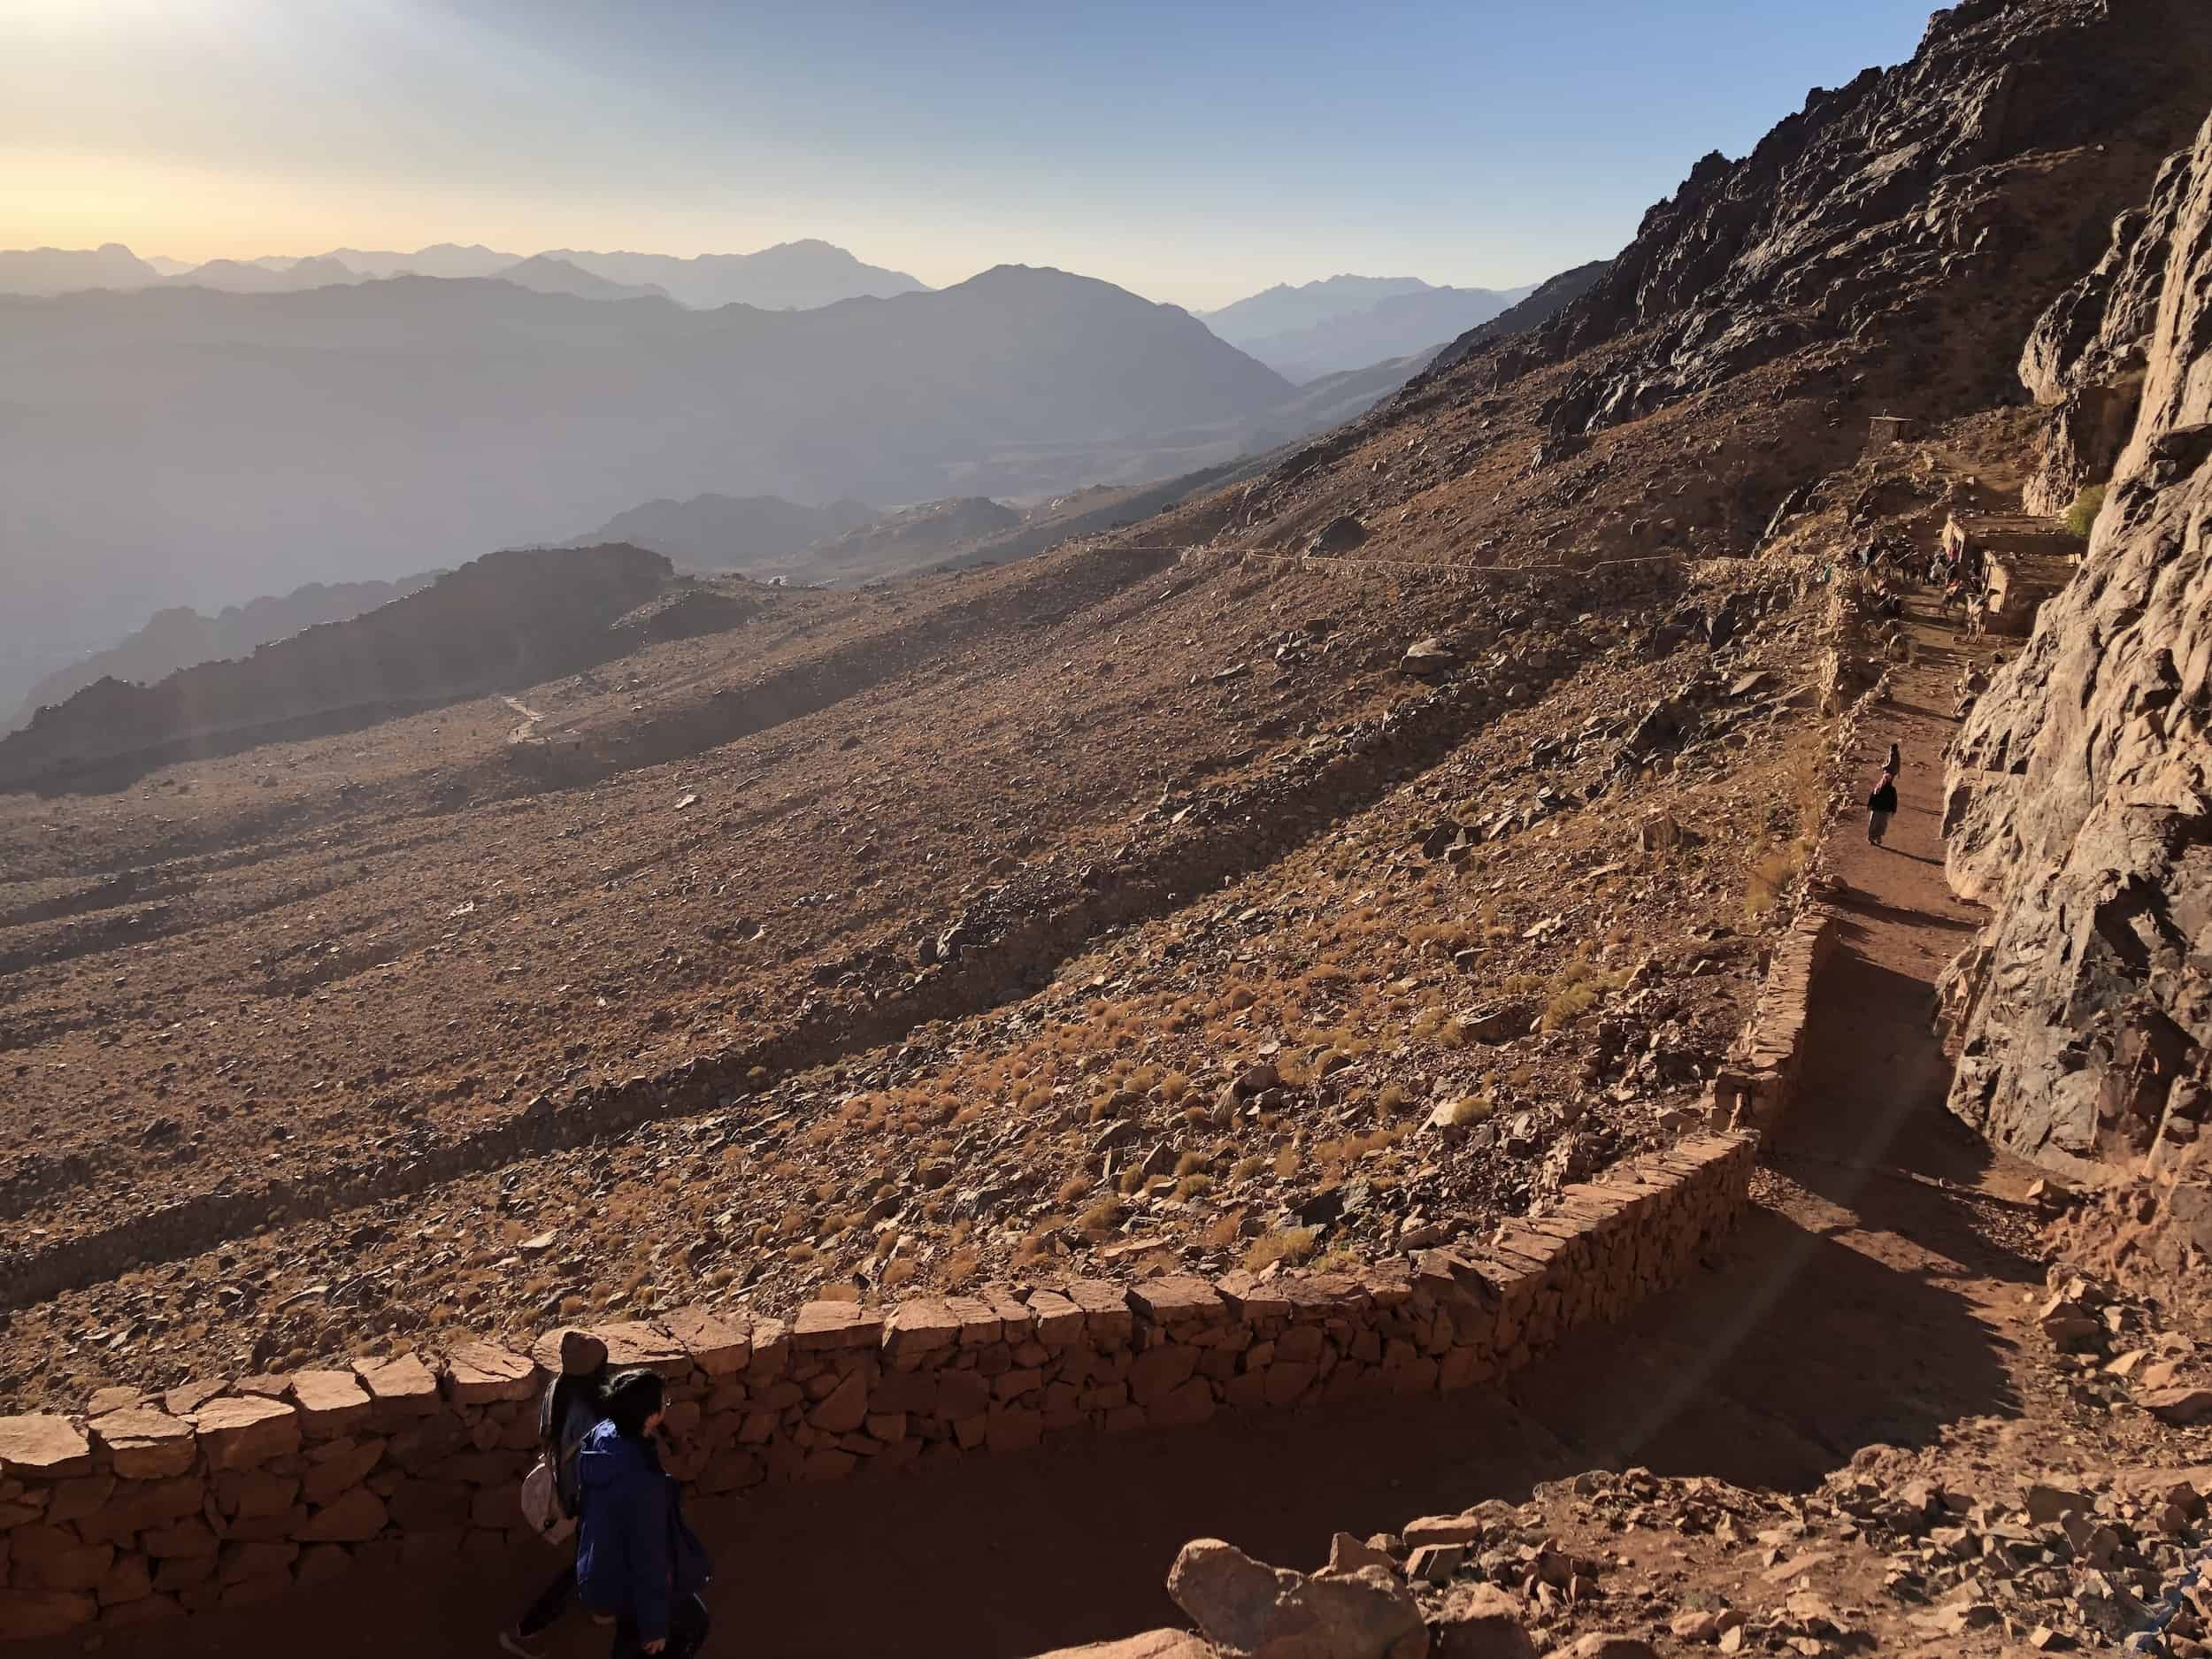 Looking down the Camel Trail on Mount Sinai, Egypt